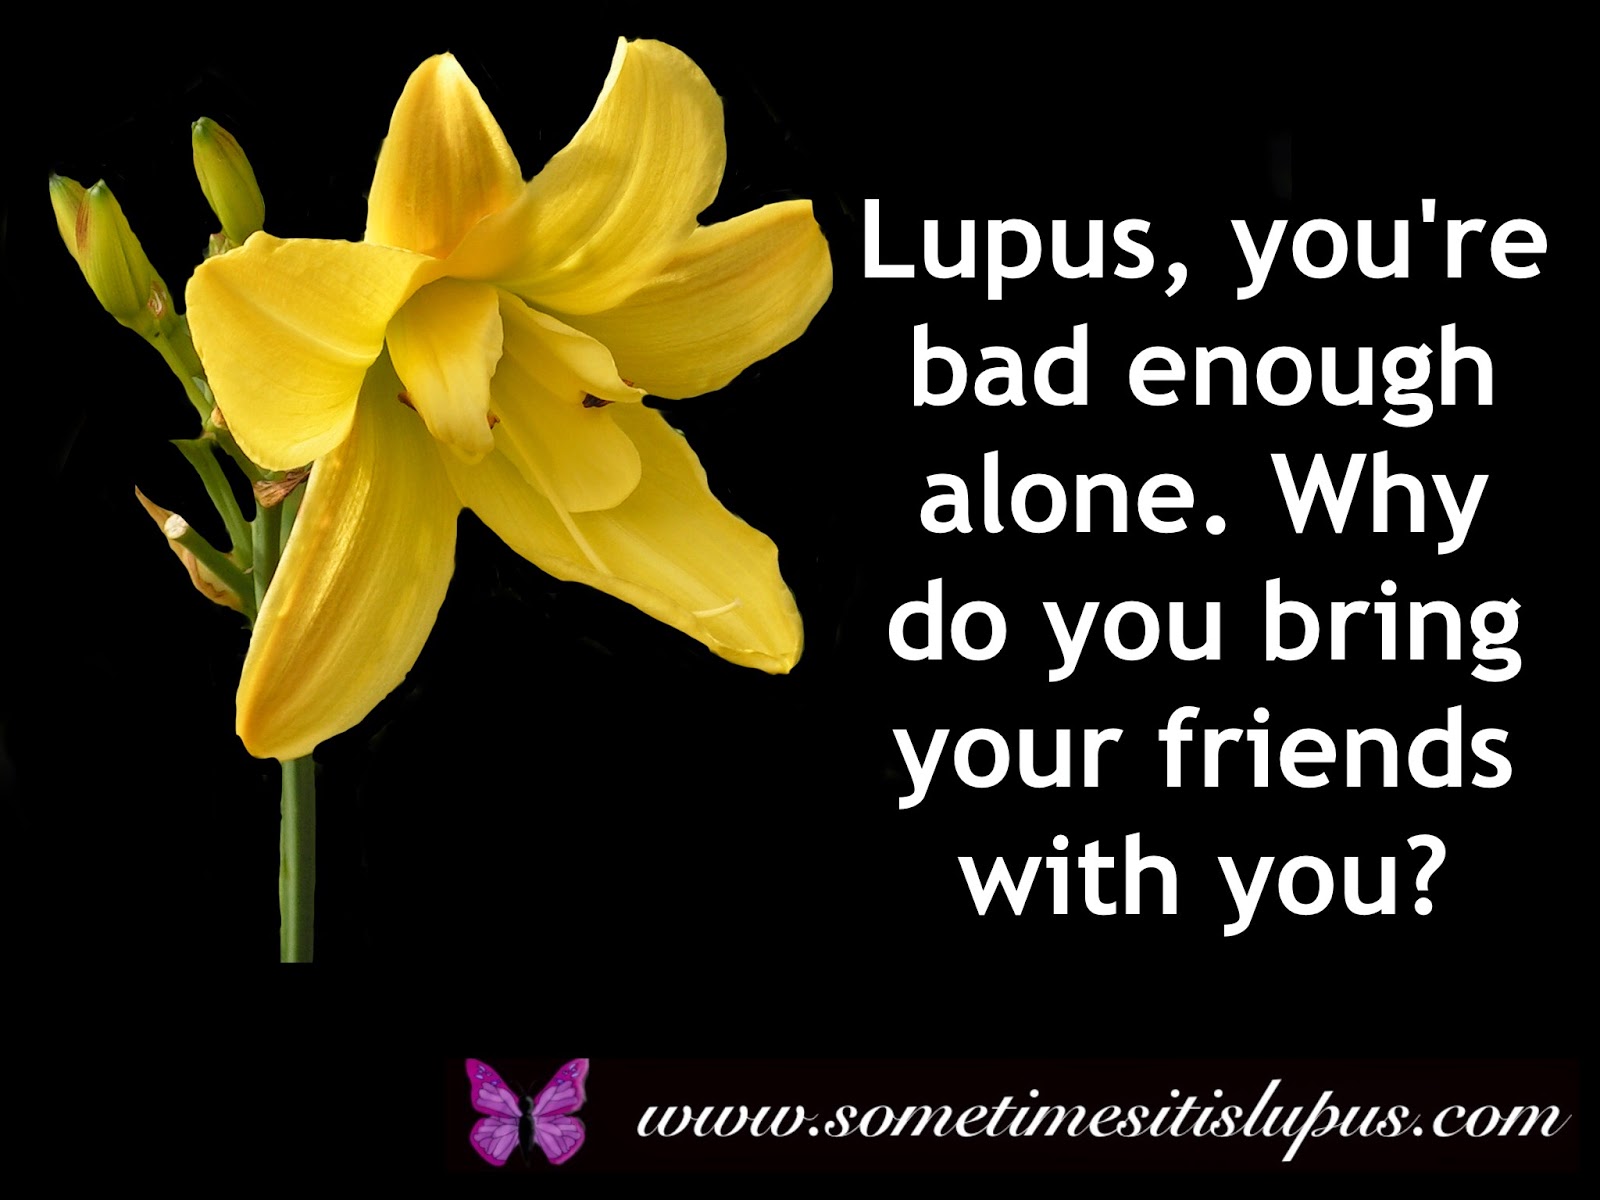 Image flower with text "Lupus, you're bad enough alone. Why do you bring your friends with you."